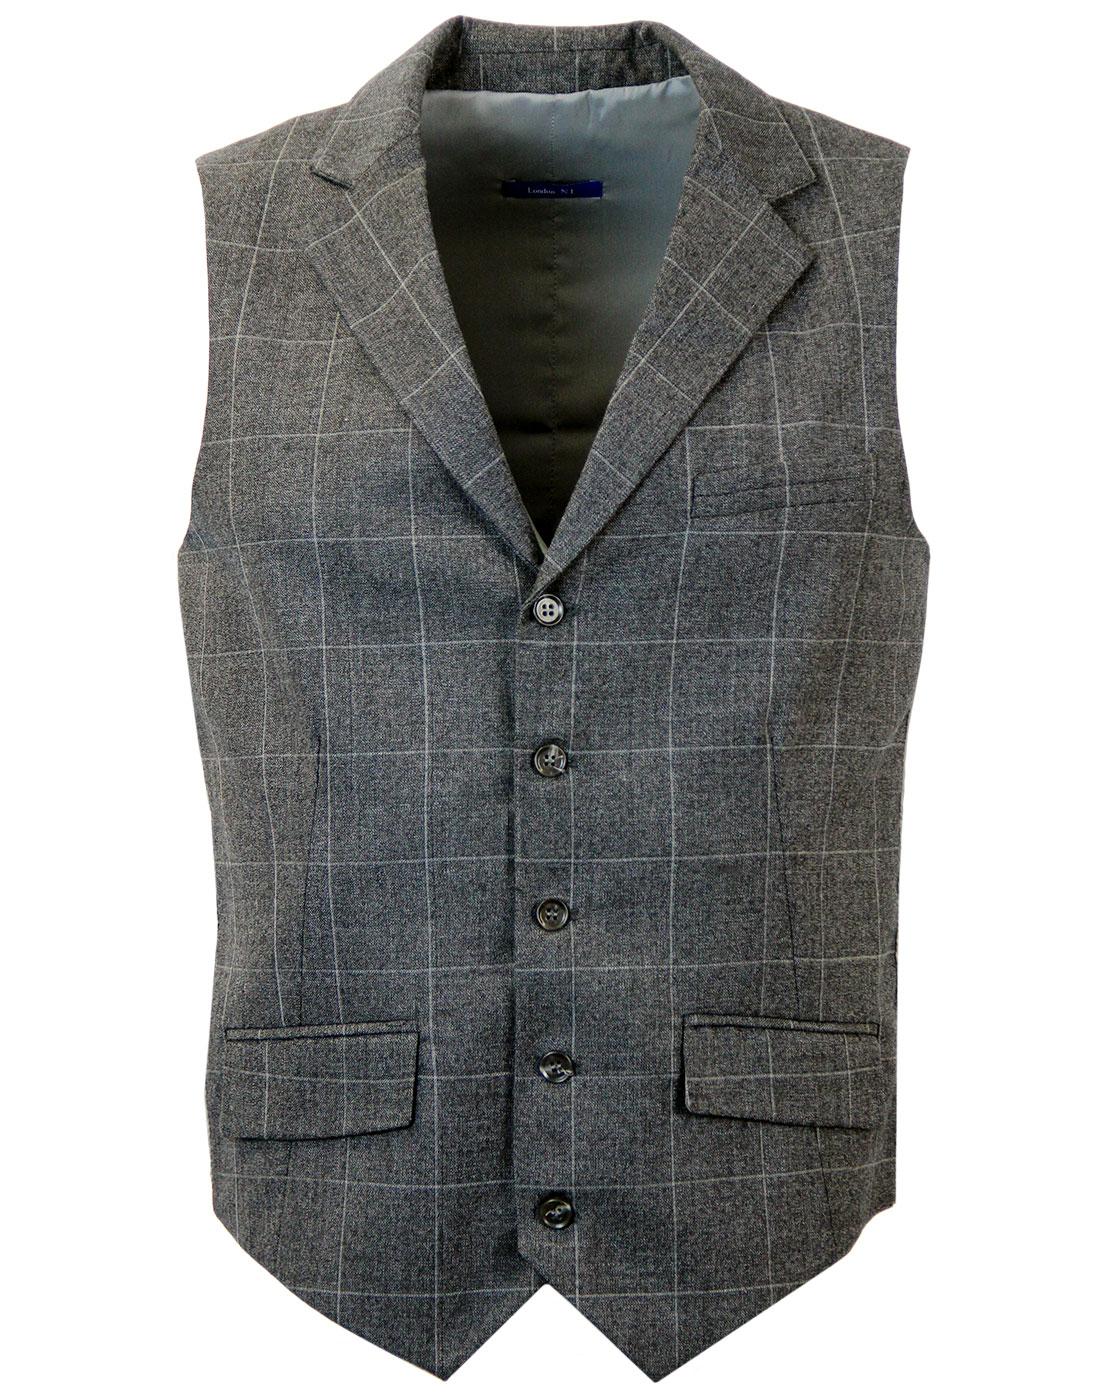 PETER WERTH Tailored Retro Mod Check Waistcoat in Charcoal